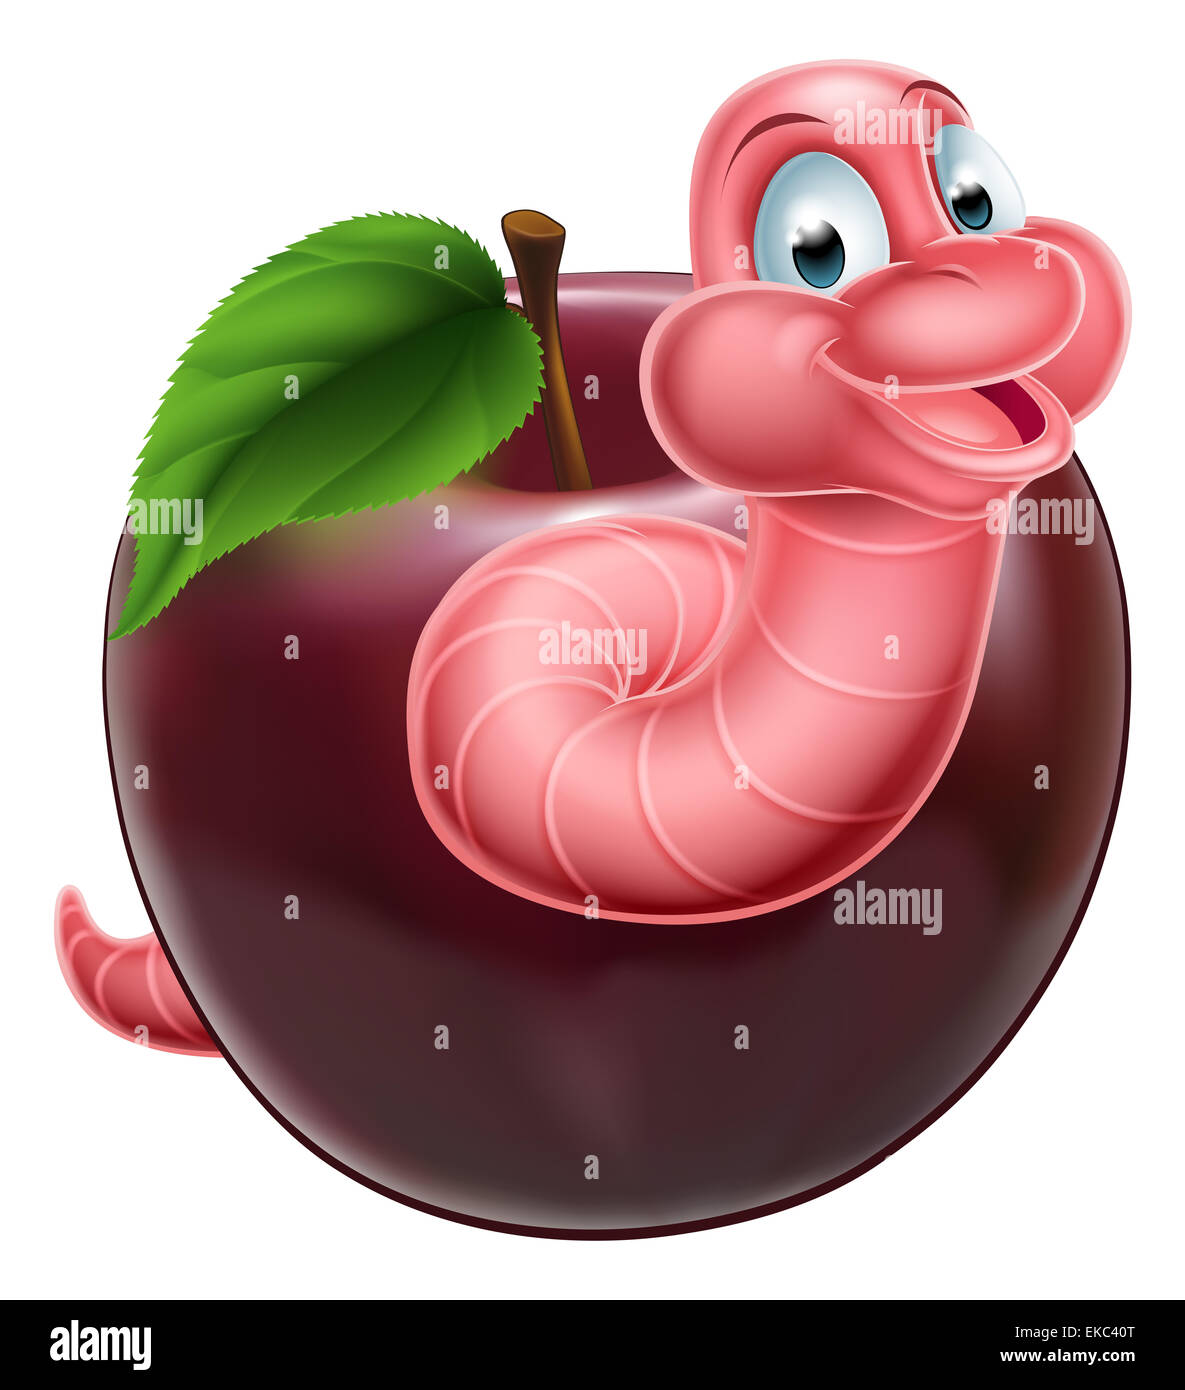 An illustration of a happy cute cartoon pink caterpillar worm character coming out of an apple Stock Photo